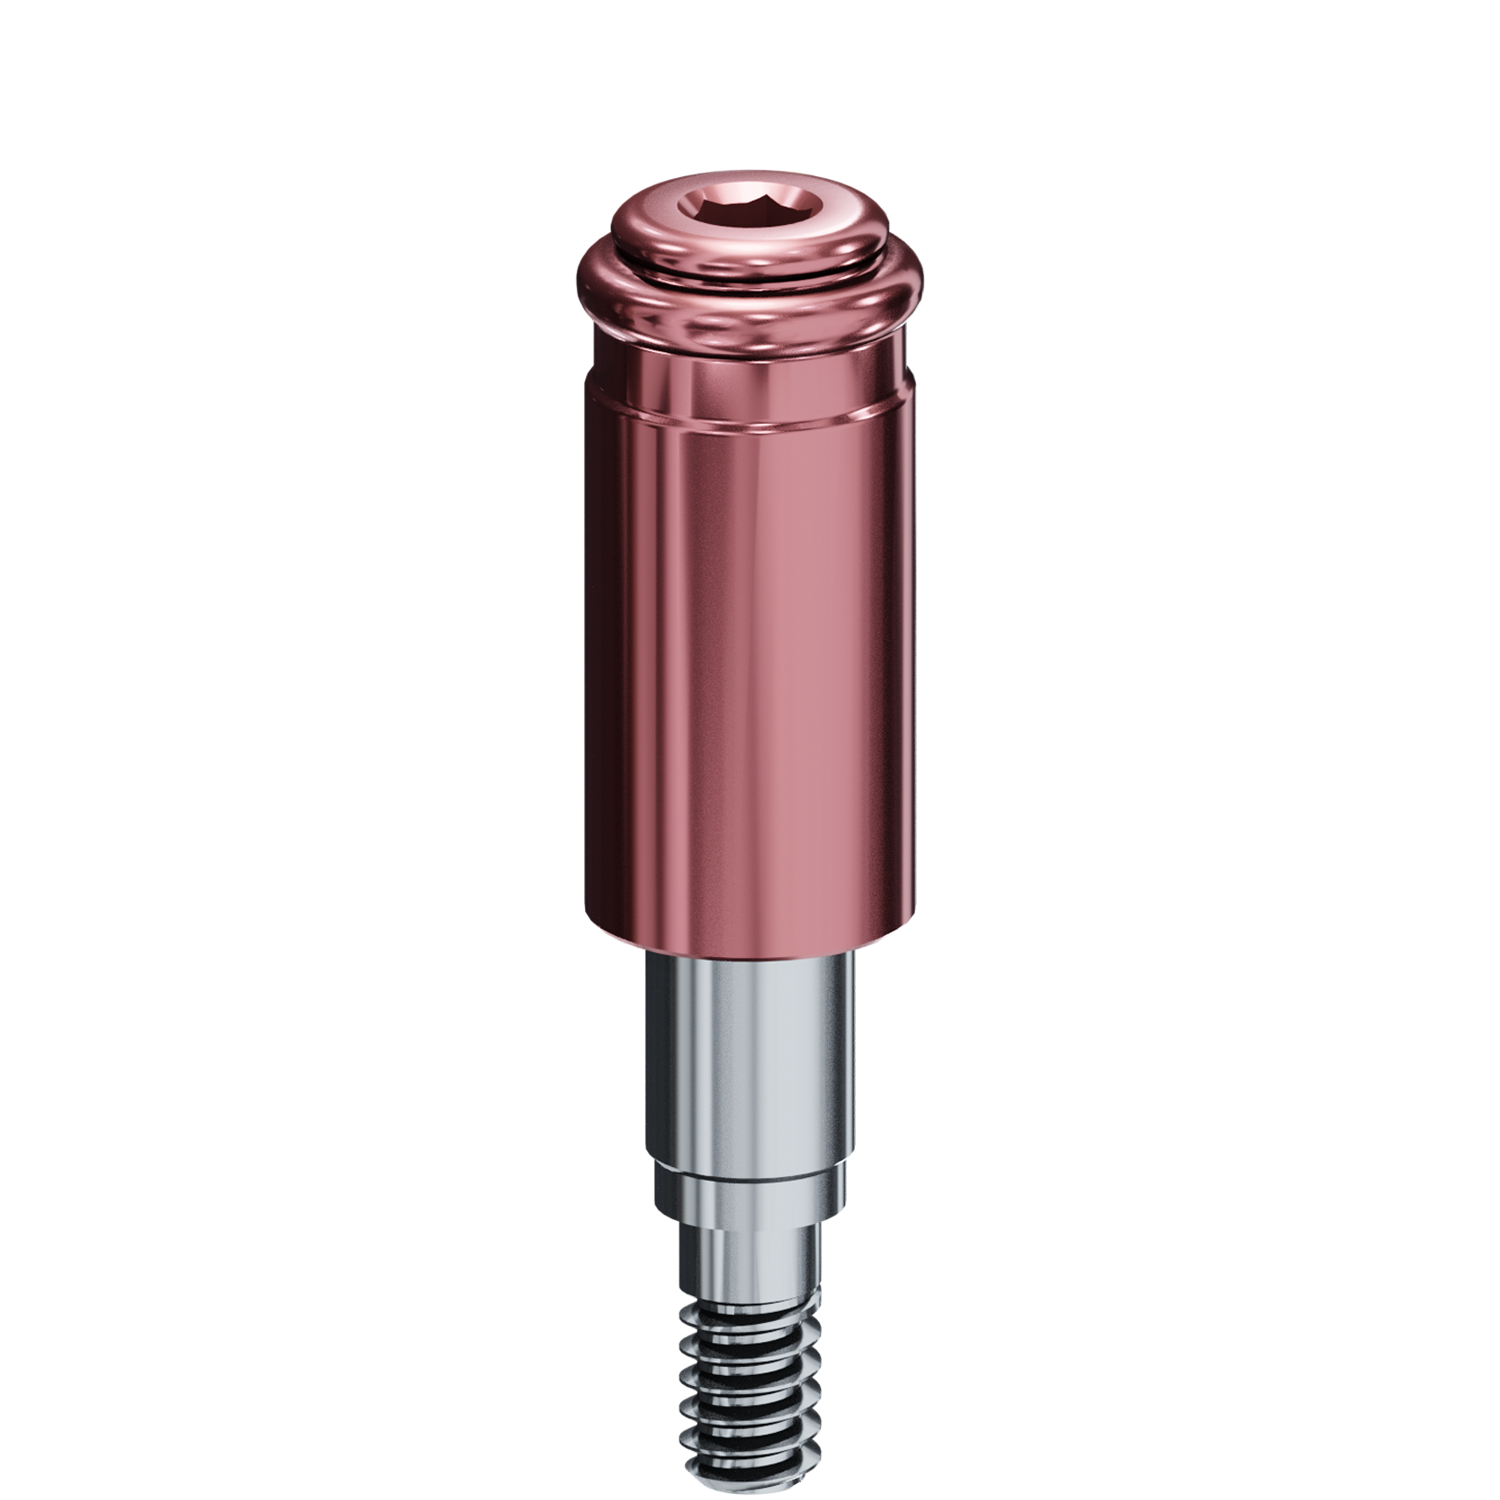 R-Tx Attachment System - 3.4mm Biomet 3i® Certain Connection - 048" Drive